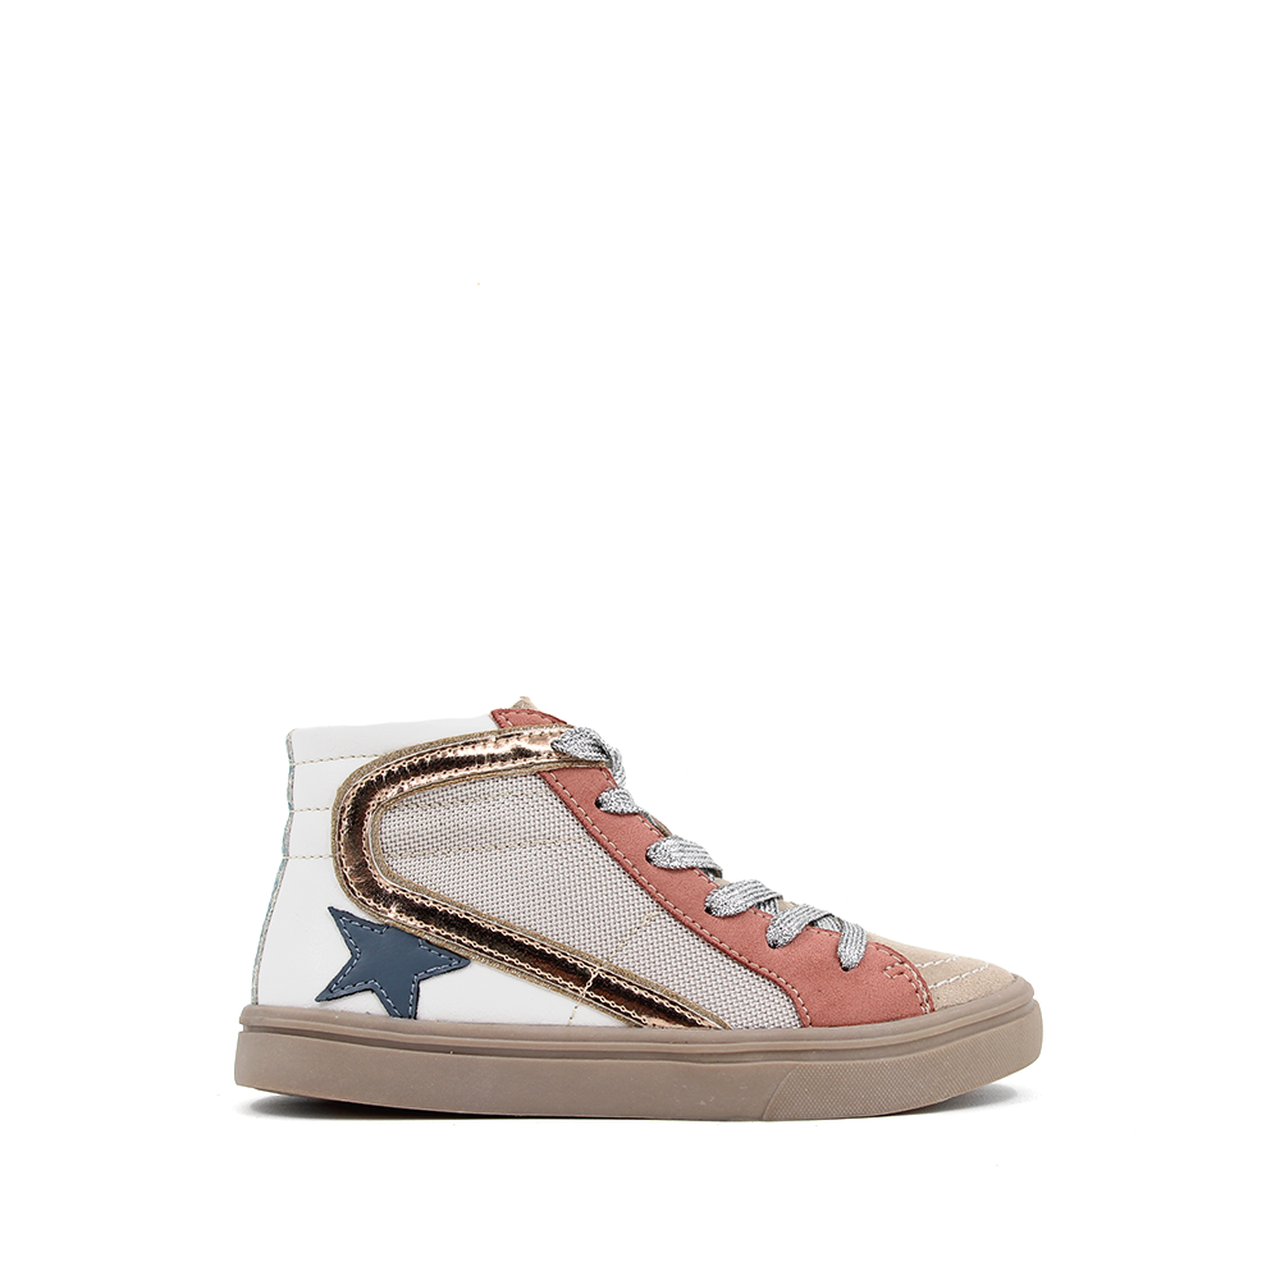 A fun sneaker that can be dressed up or down. Features silver laces, suede detailing, and side zipper.